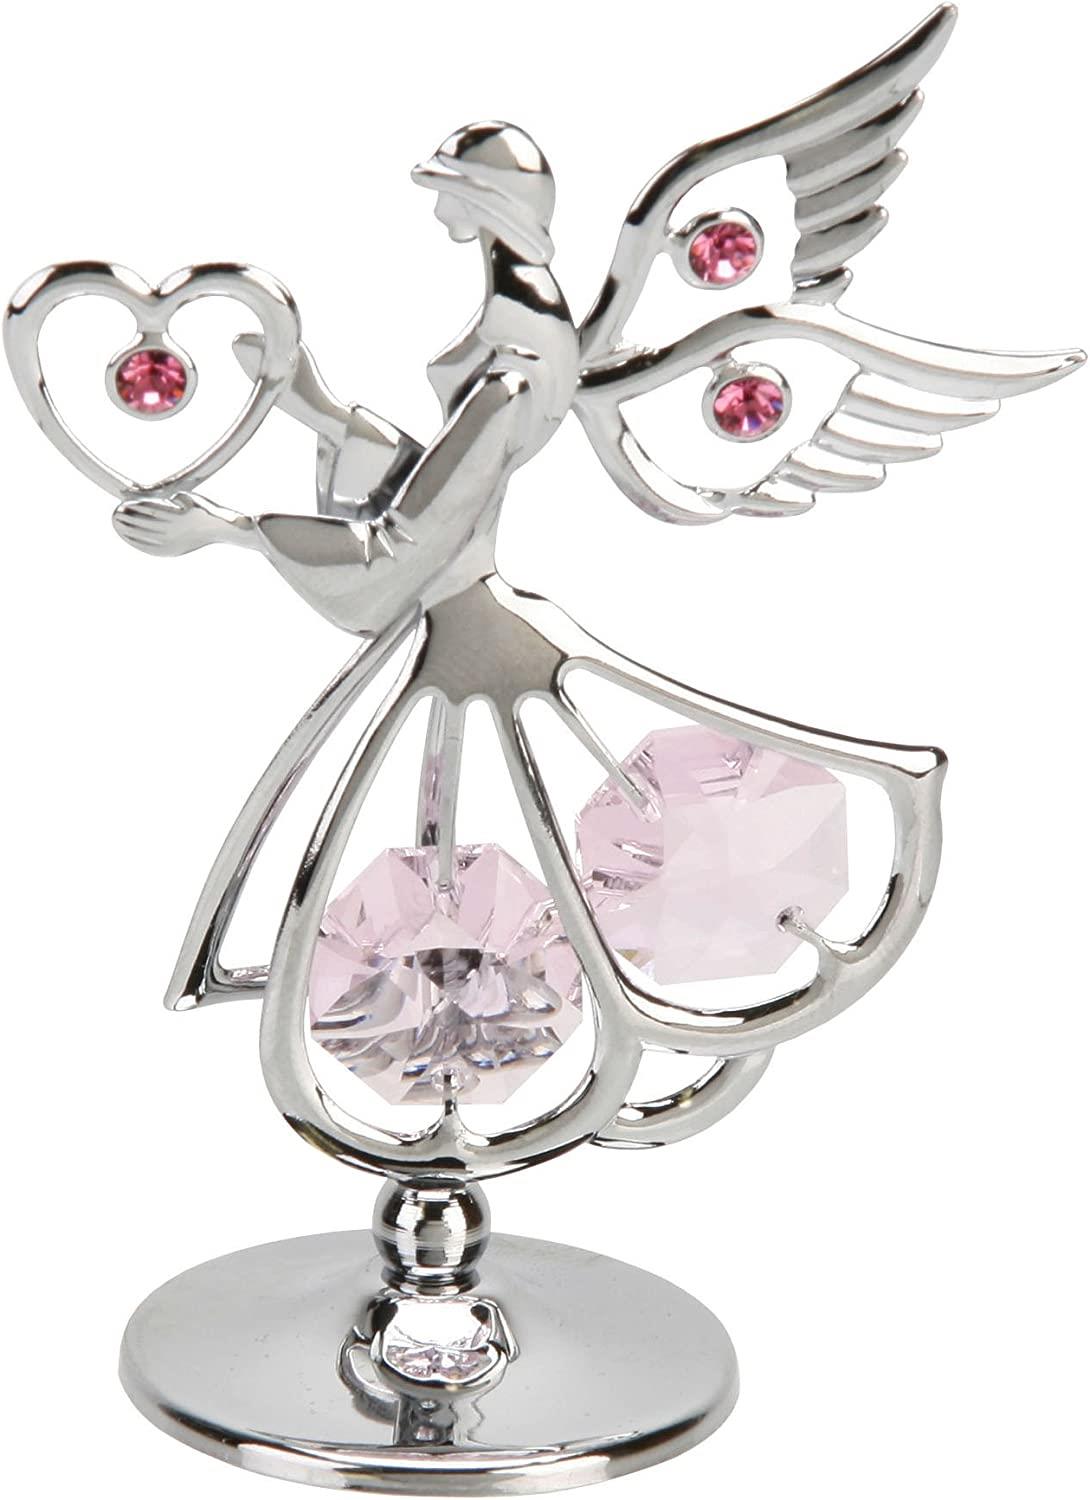 Crystocraft Standing Mini Sacred Angel With Heart - Chrome Plated with Strass and Swarovski Crystals